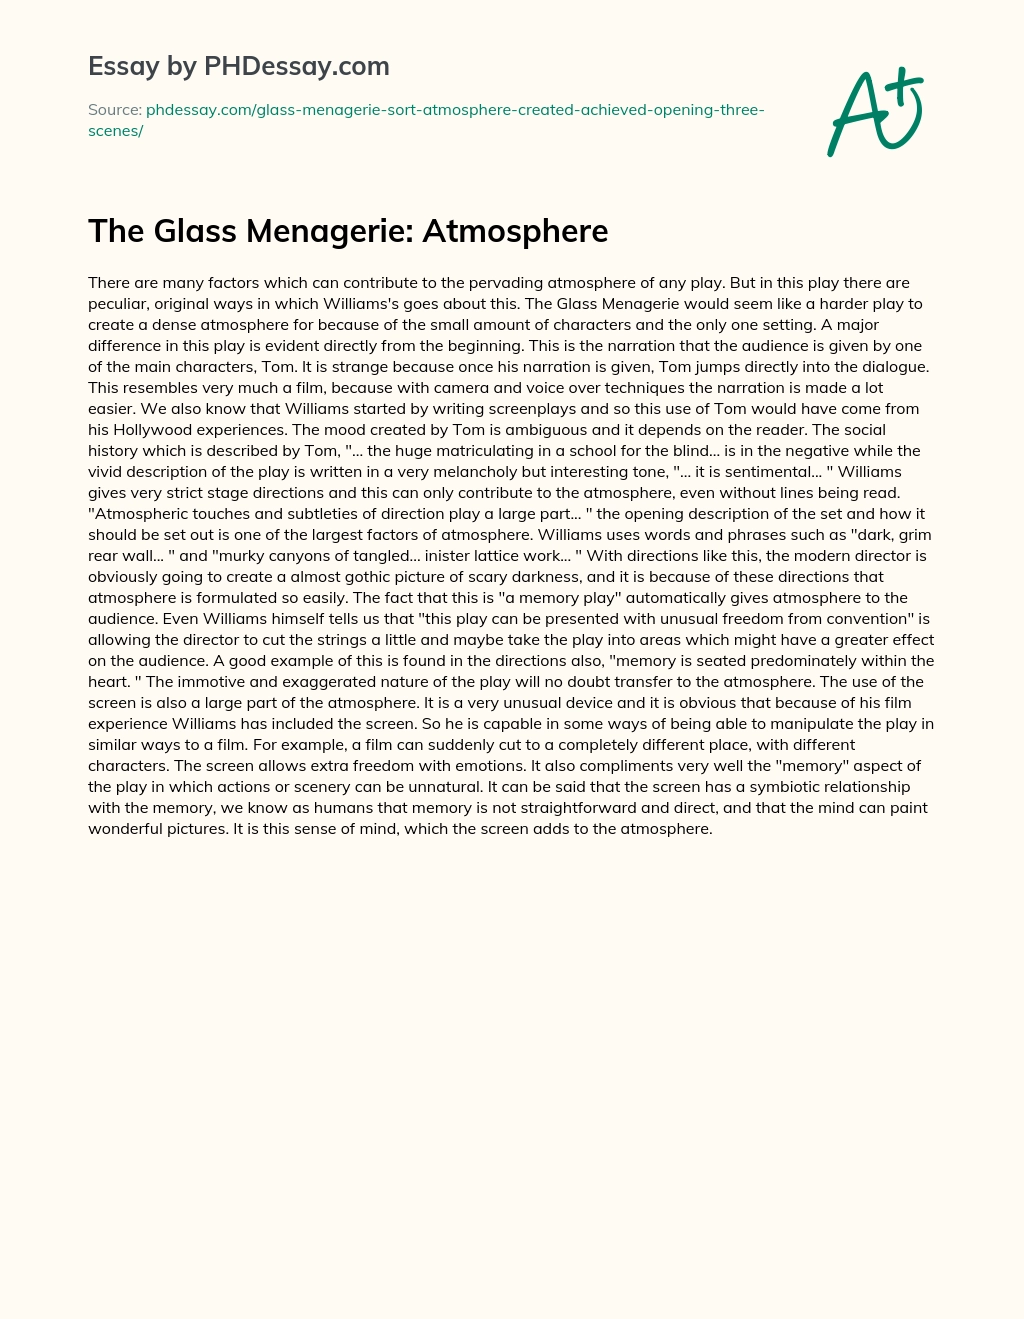 The Glass Menagerie: Atmosphere essay